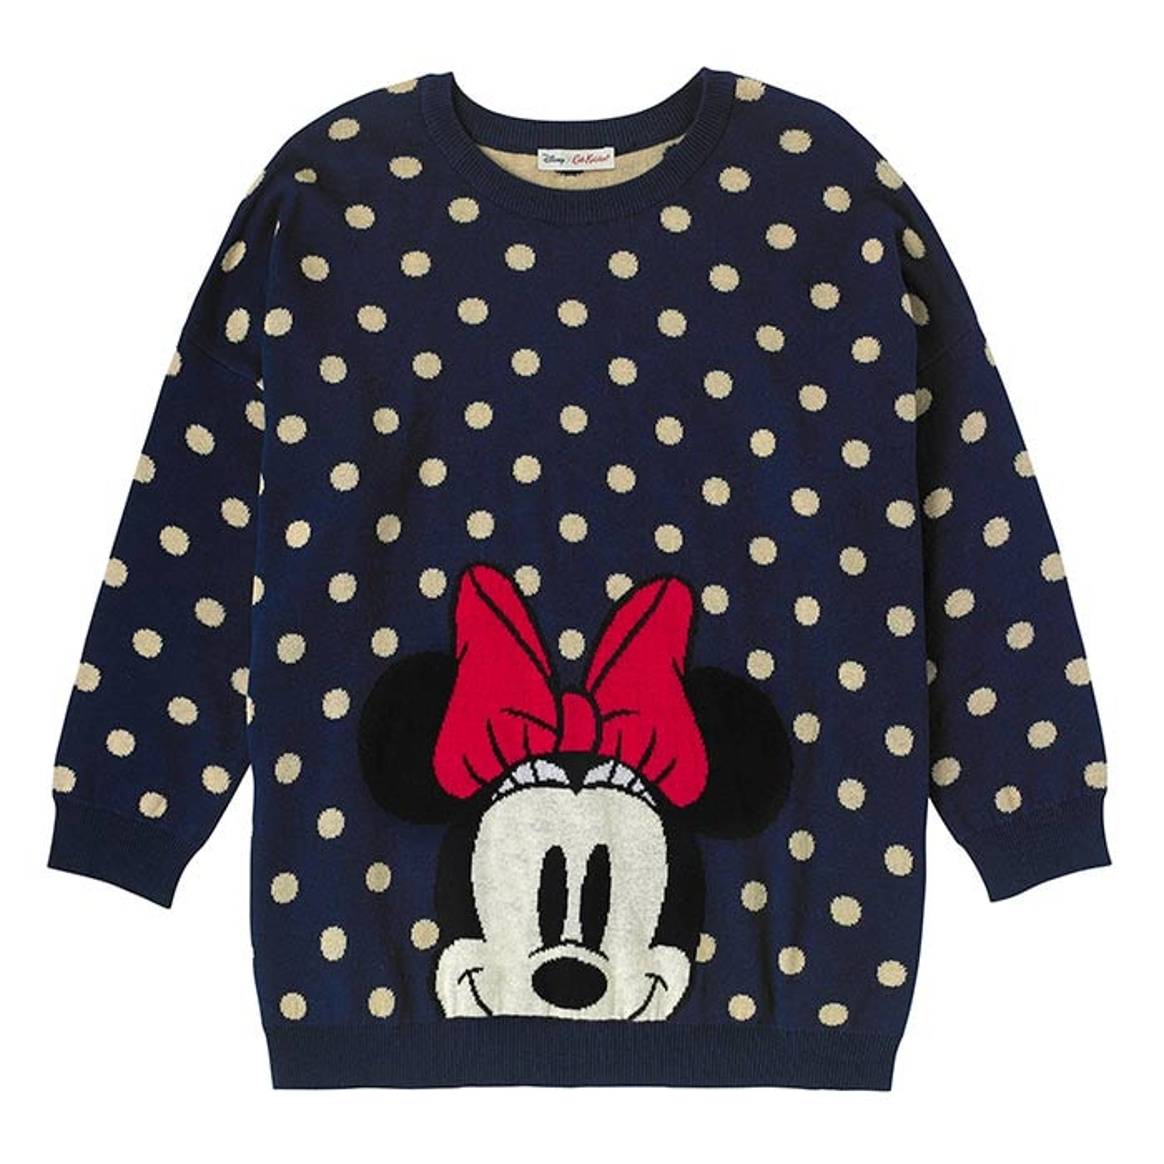 In Pictures: Cath Kidston x Mickey Mouse